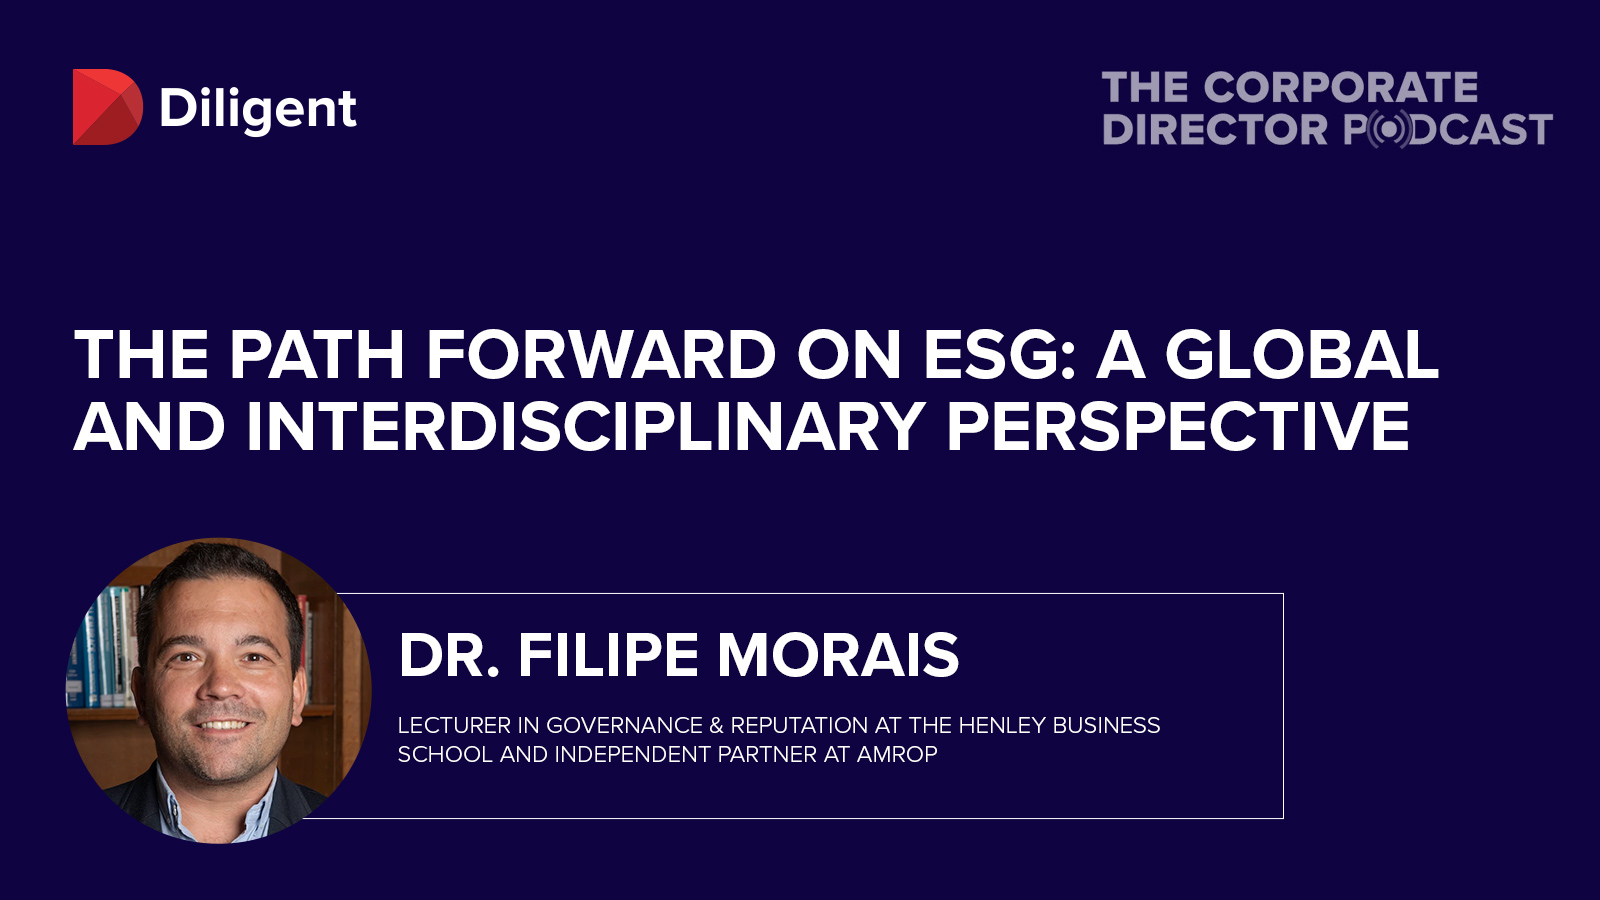 The Path Forward on ESG: A Global and Interdisciplinary Perspective